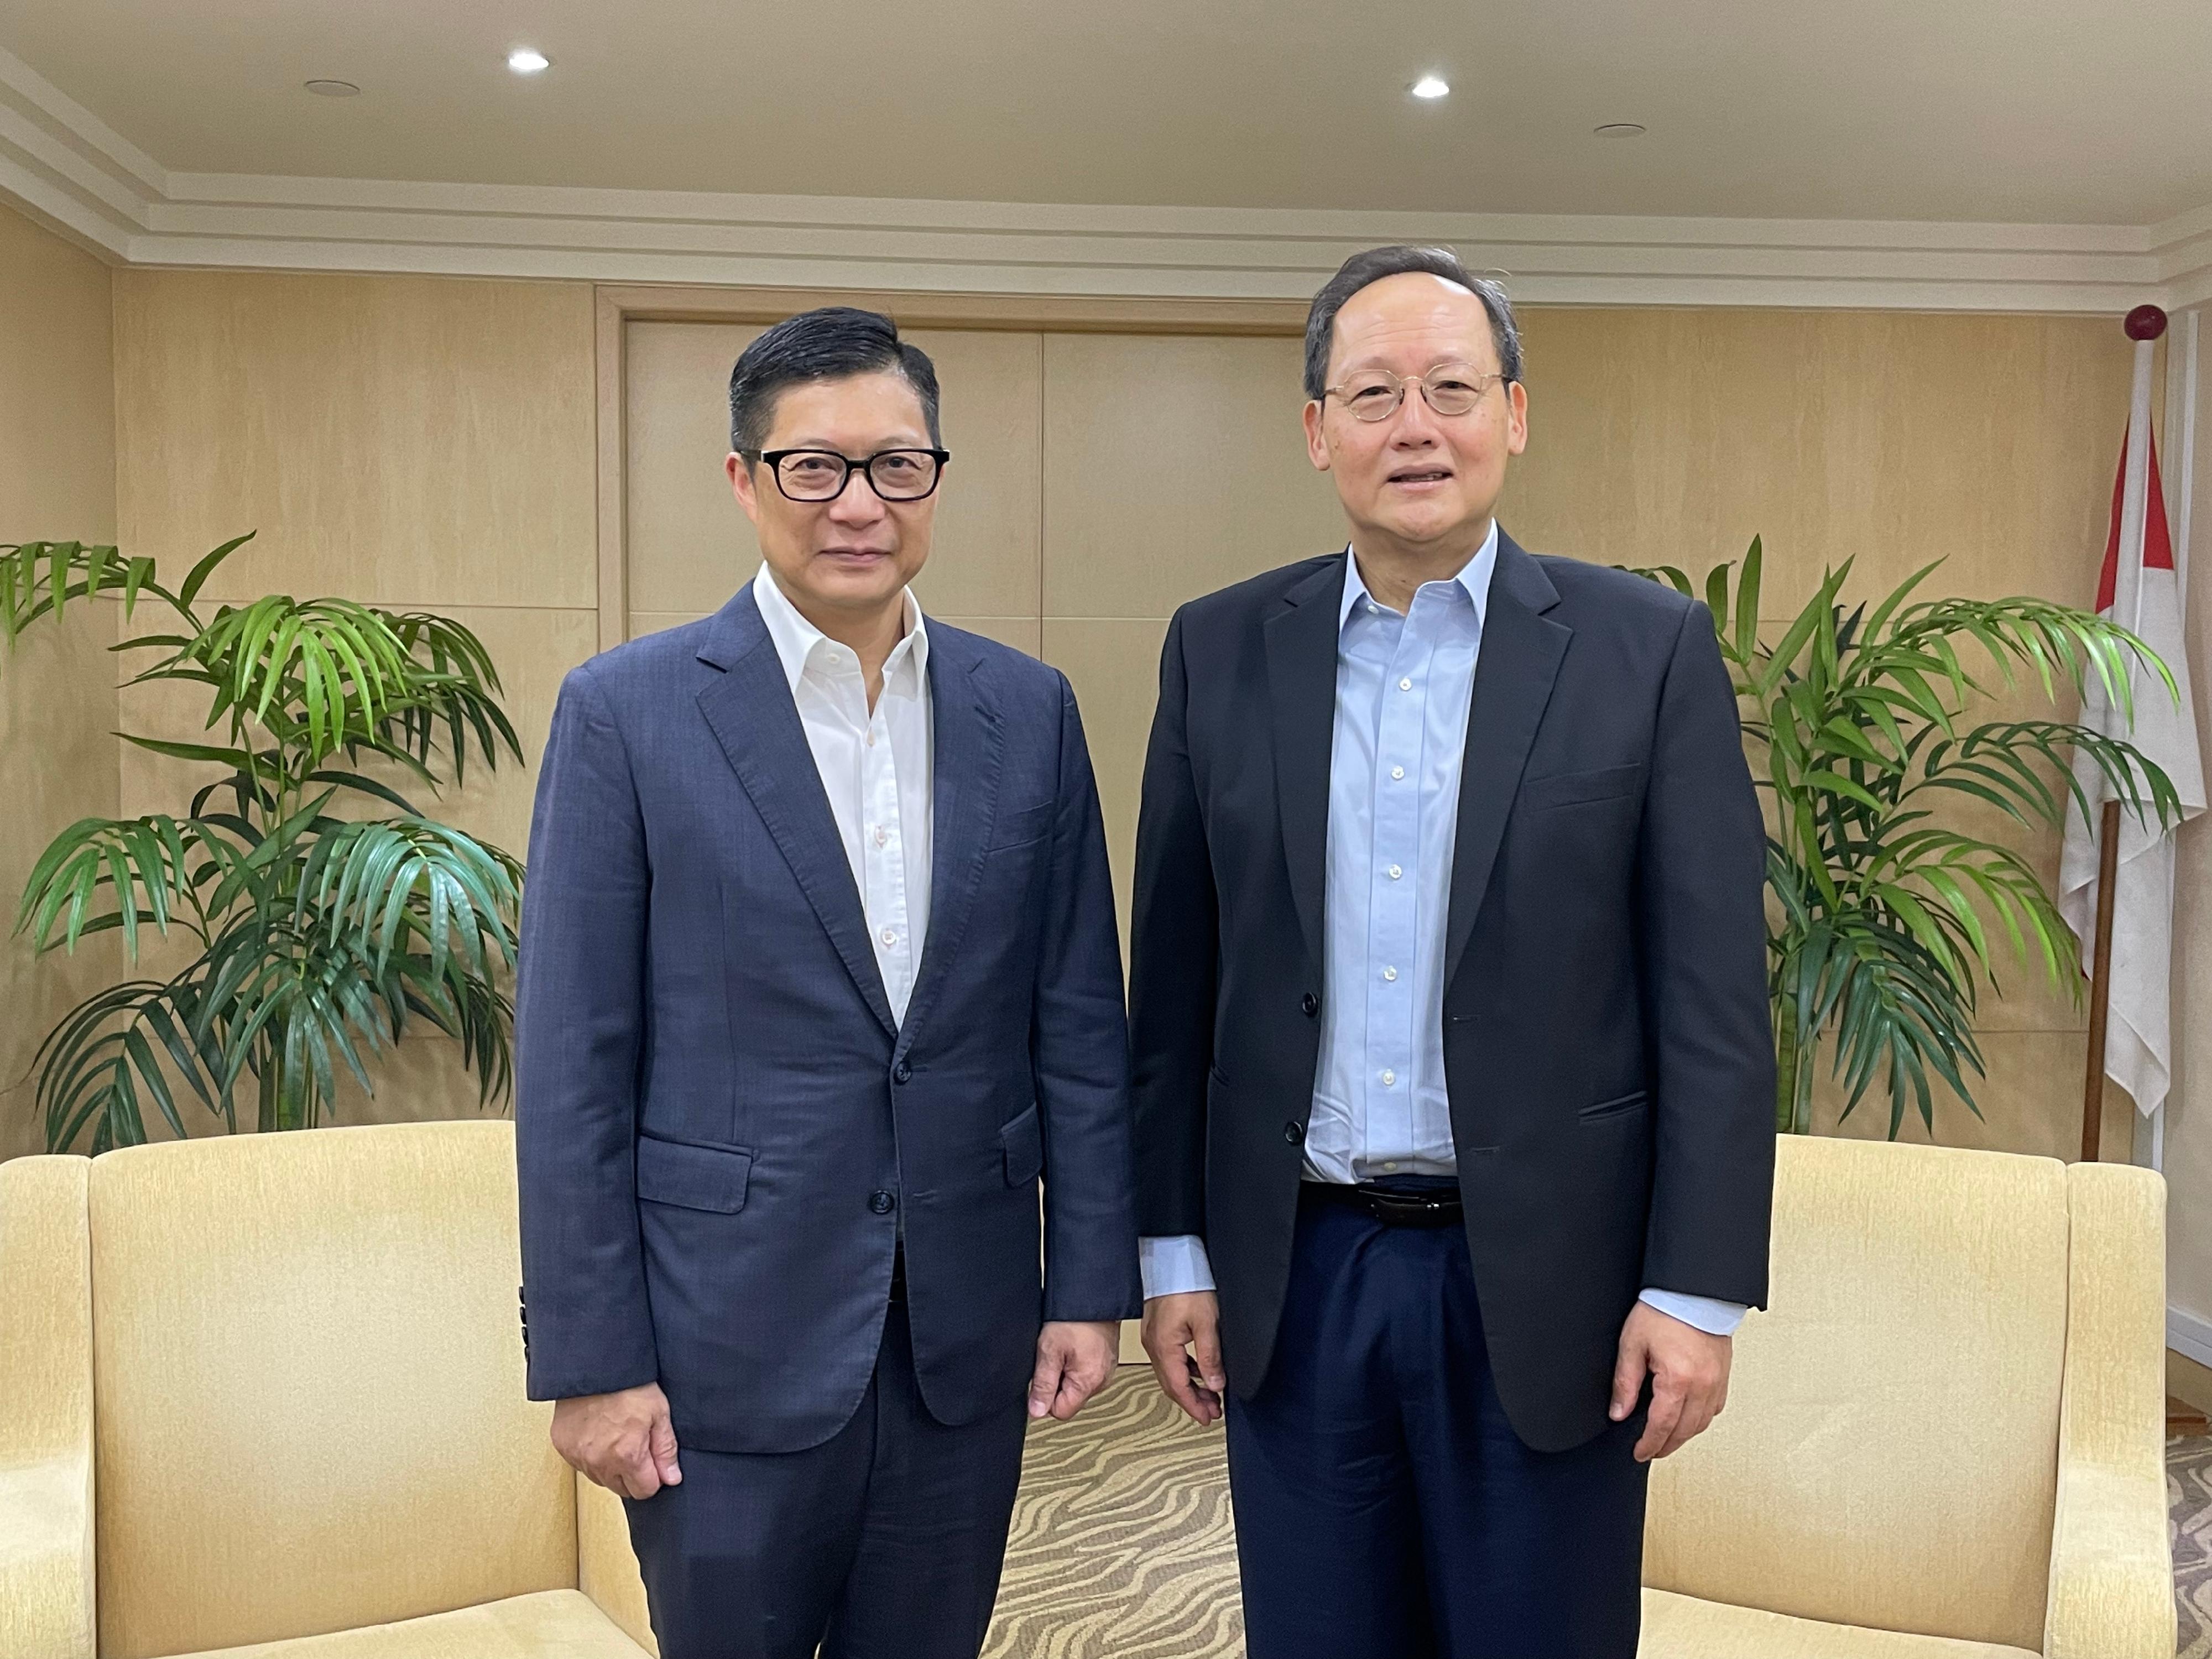 The Secretary for Security, Mr Tang Ping-keung, continued his visit programme to Singapore today (August 31). Photo shows Mr Tang (left) with the Minister for Manpower, Dr Tan See Leng (right), after a meeting.